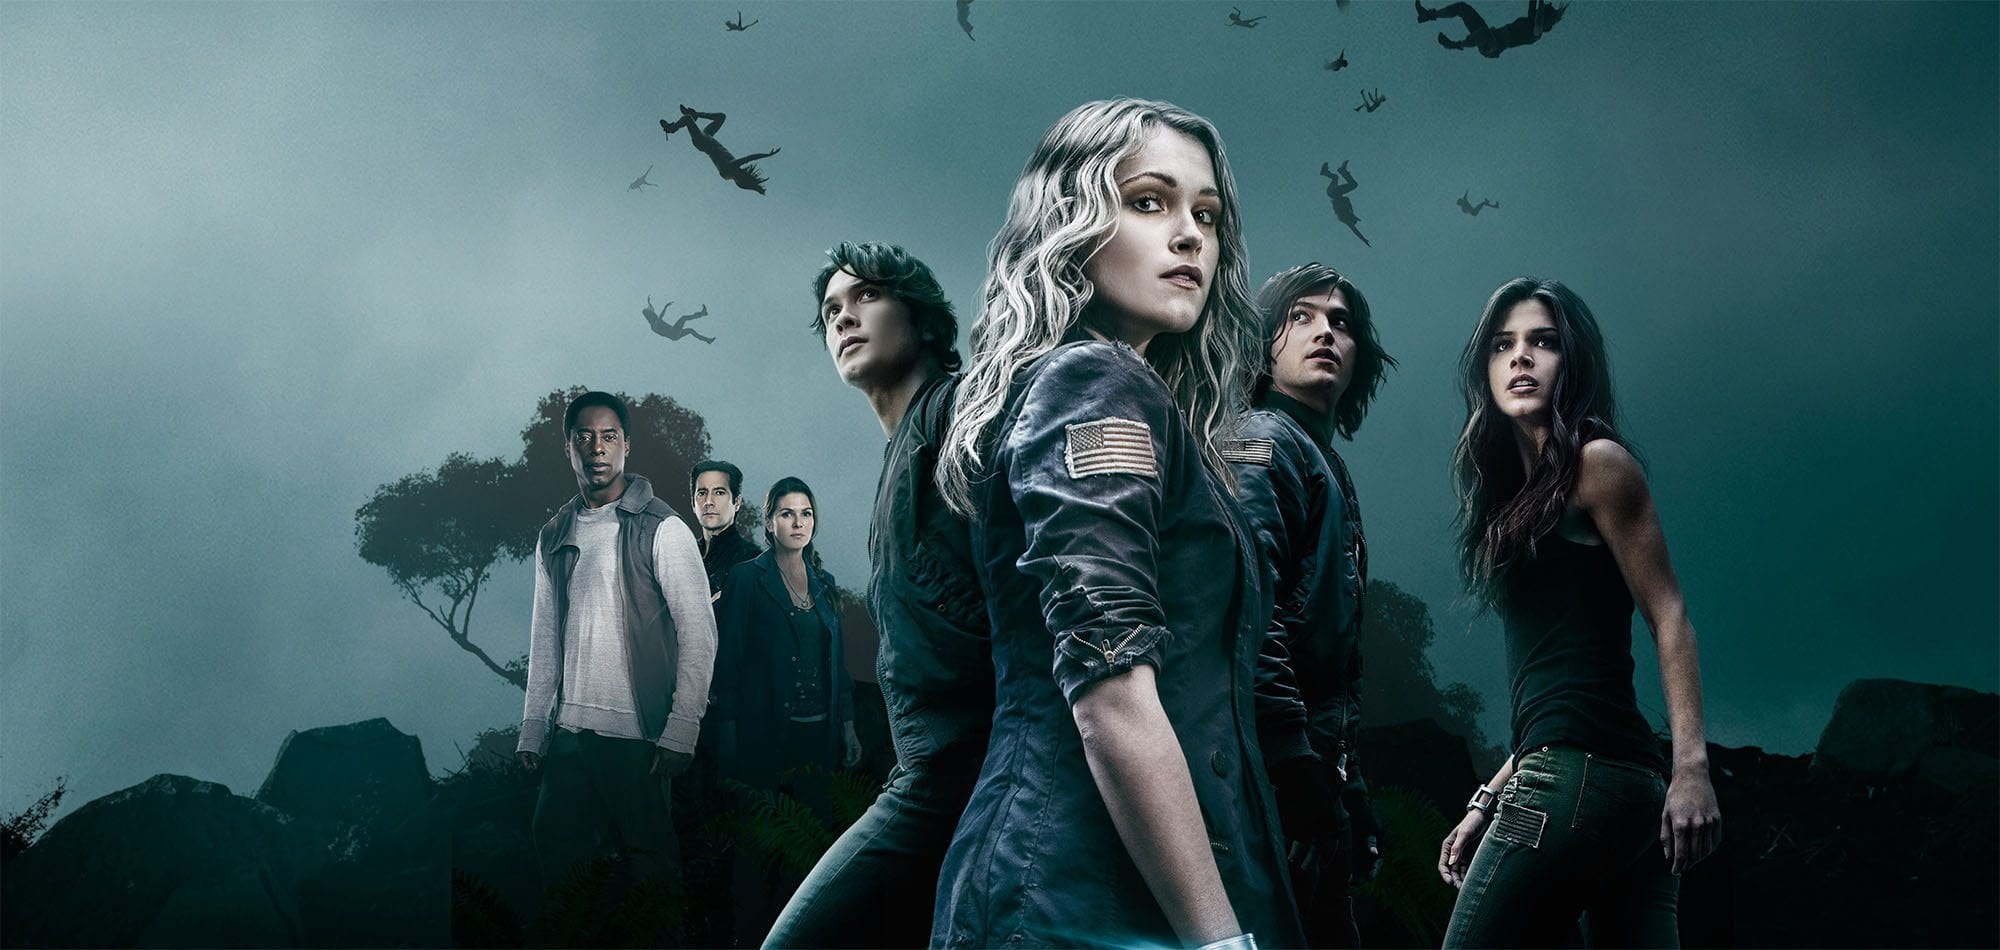 Are you still missing 'The 100' after the sci fi series was finished? We're going through the show's greatest episodes.